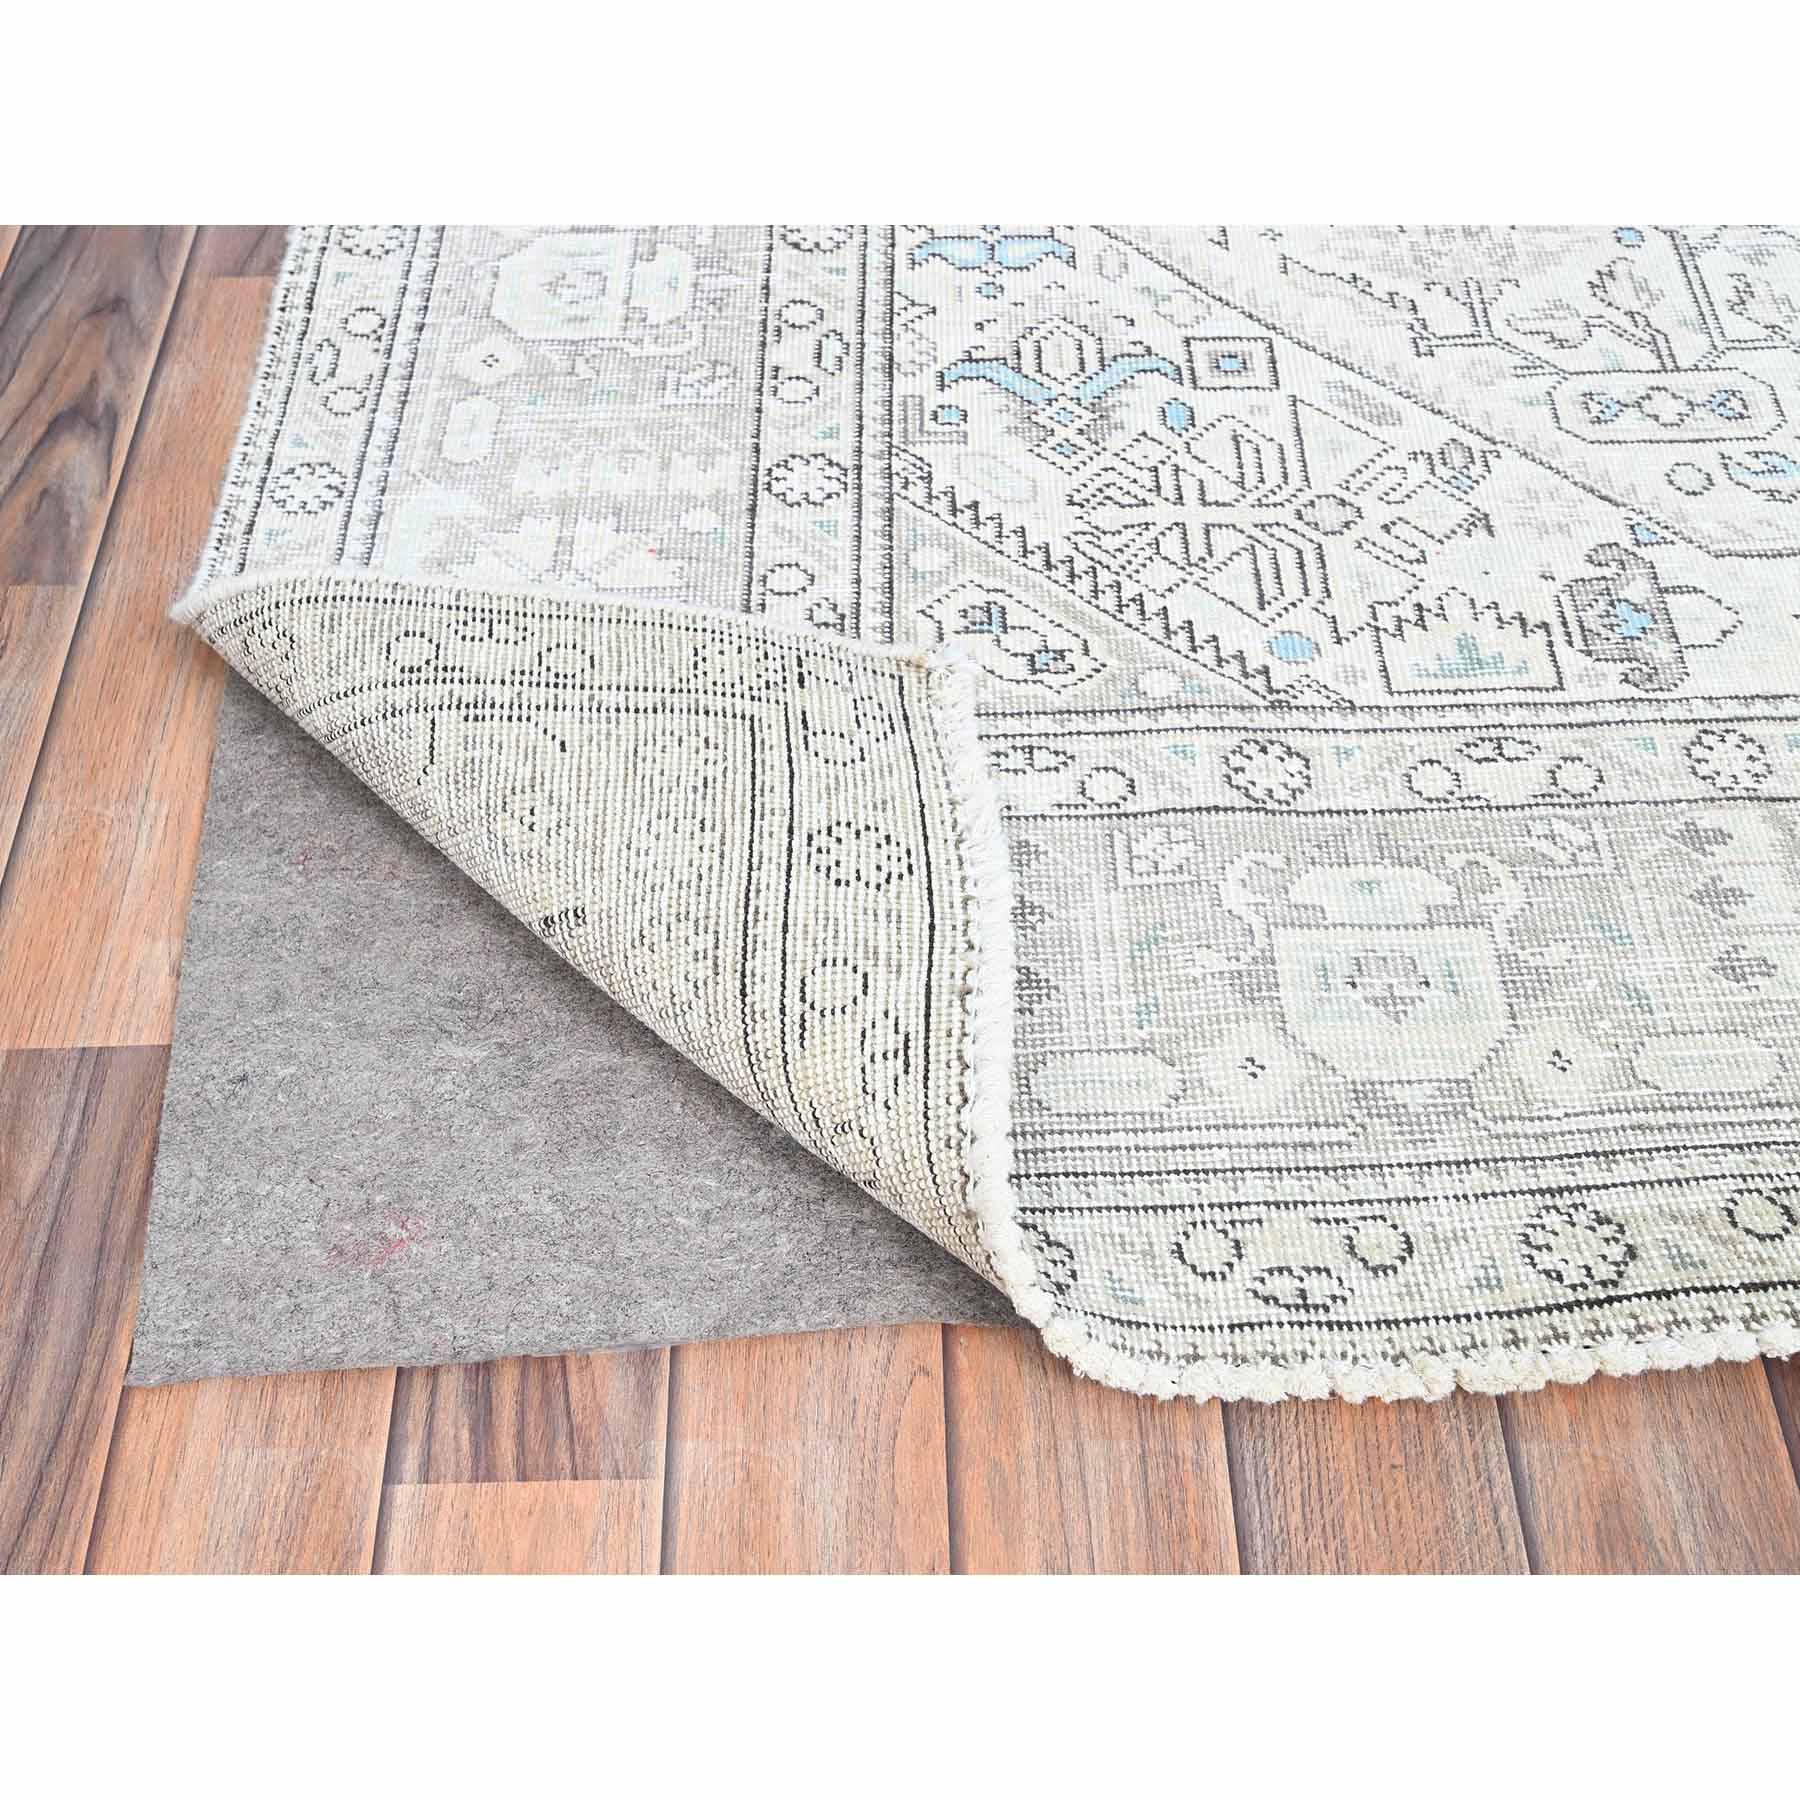 Overdyed-Vintage-Hand-Knotted-Rug-430475